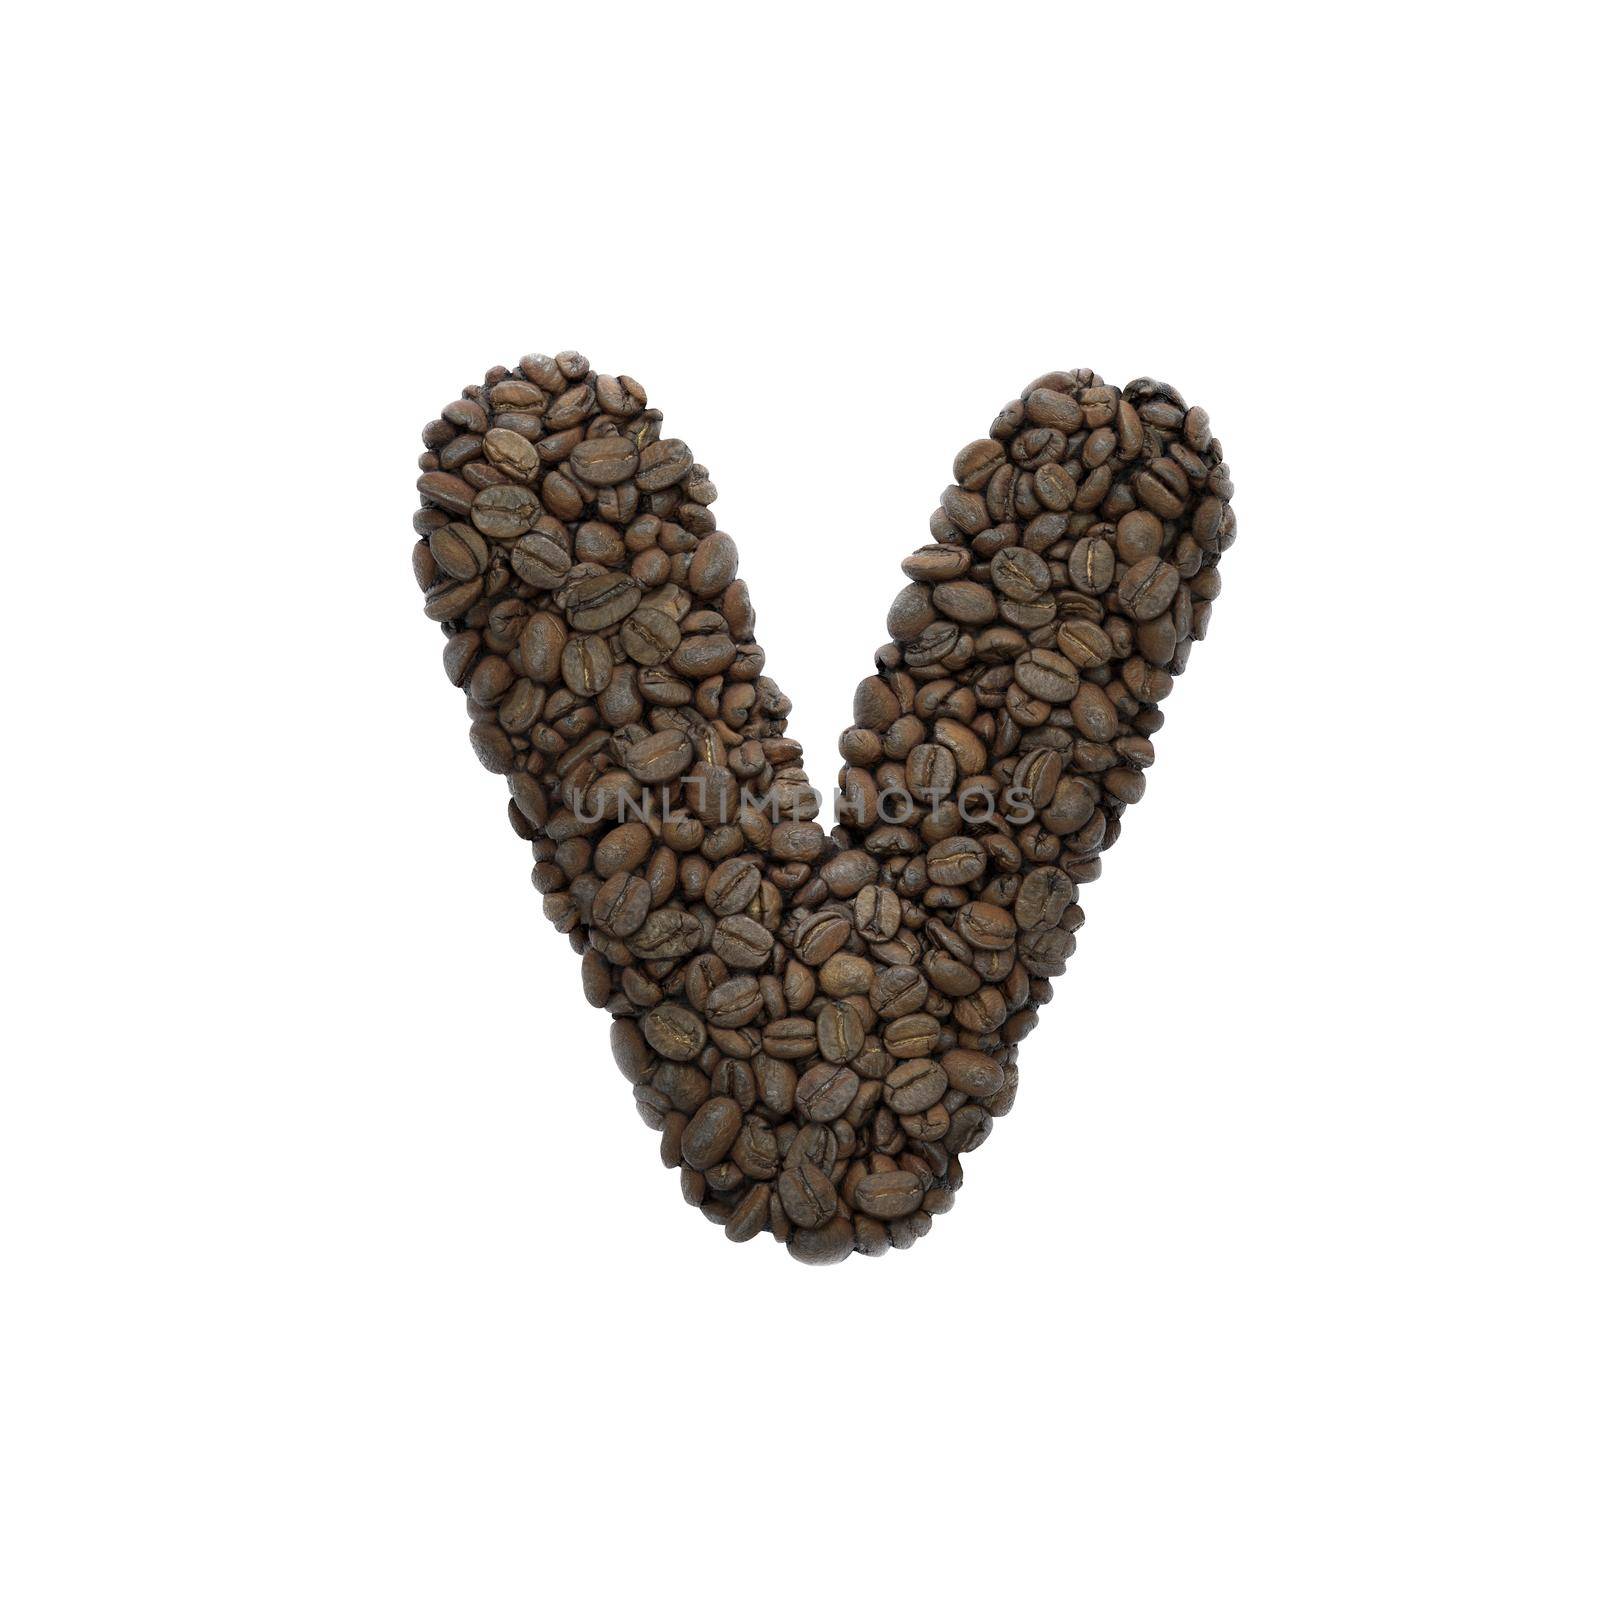 Coffee letter V - Small 3d roasted beans font isolated on white background. This alphabet is perfect for creative illustrations related but not limited to Coffee, energy, insomnia...